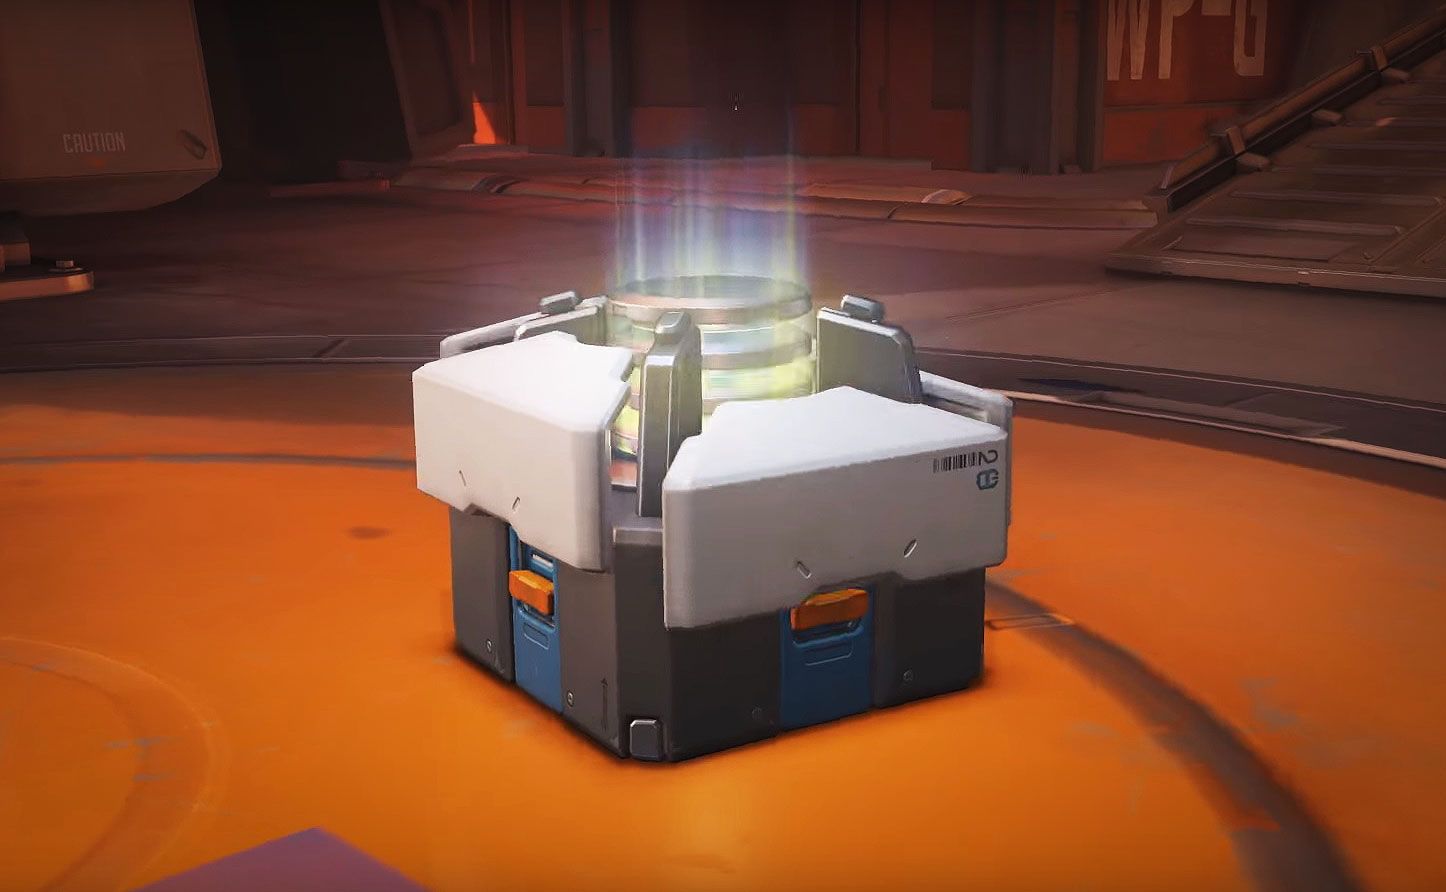 Belgian Gaming Commission Wants Criminal Prosecution Over Illegal Loot Boxes